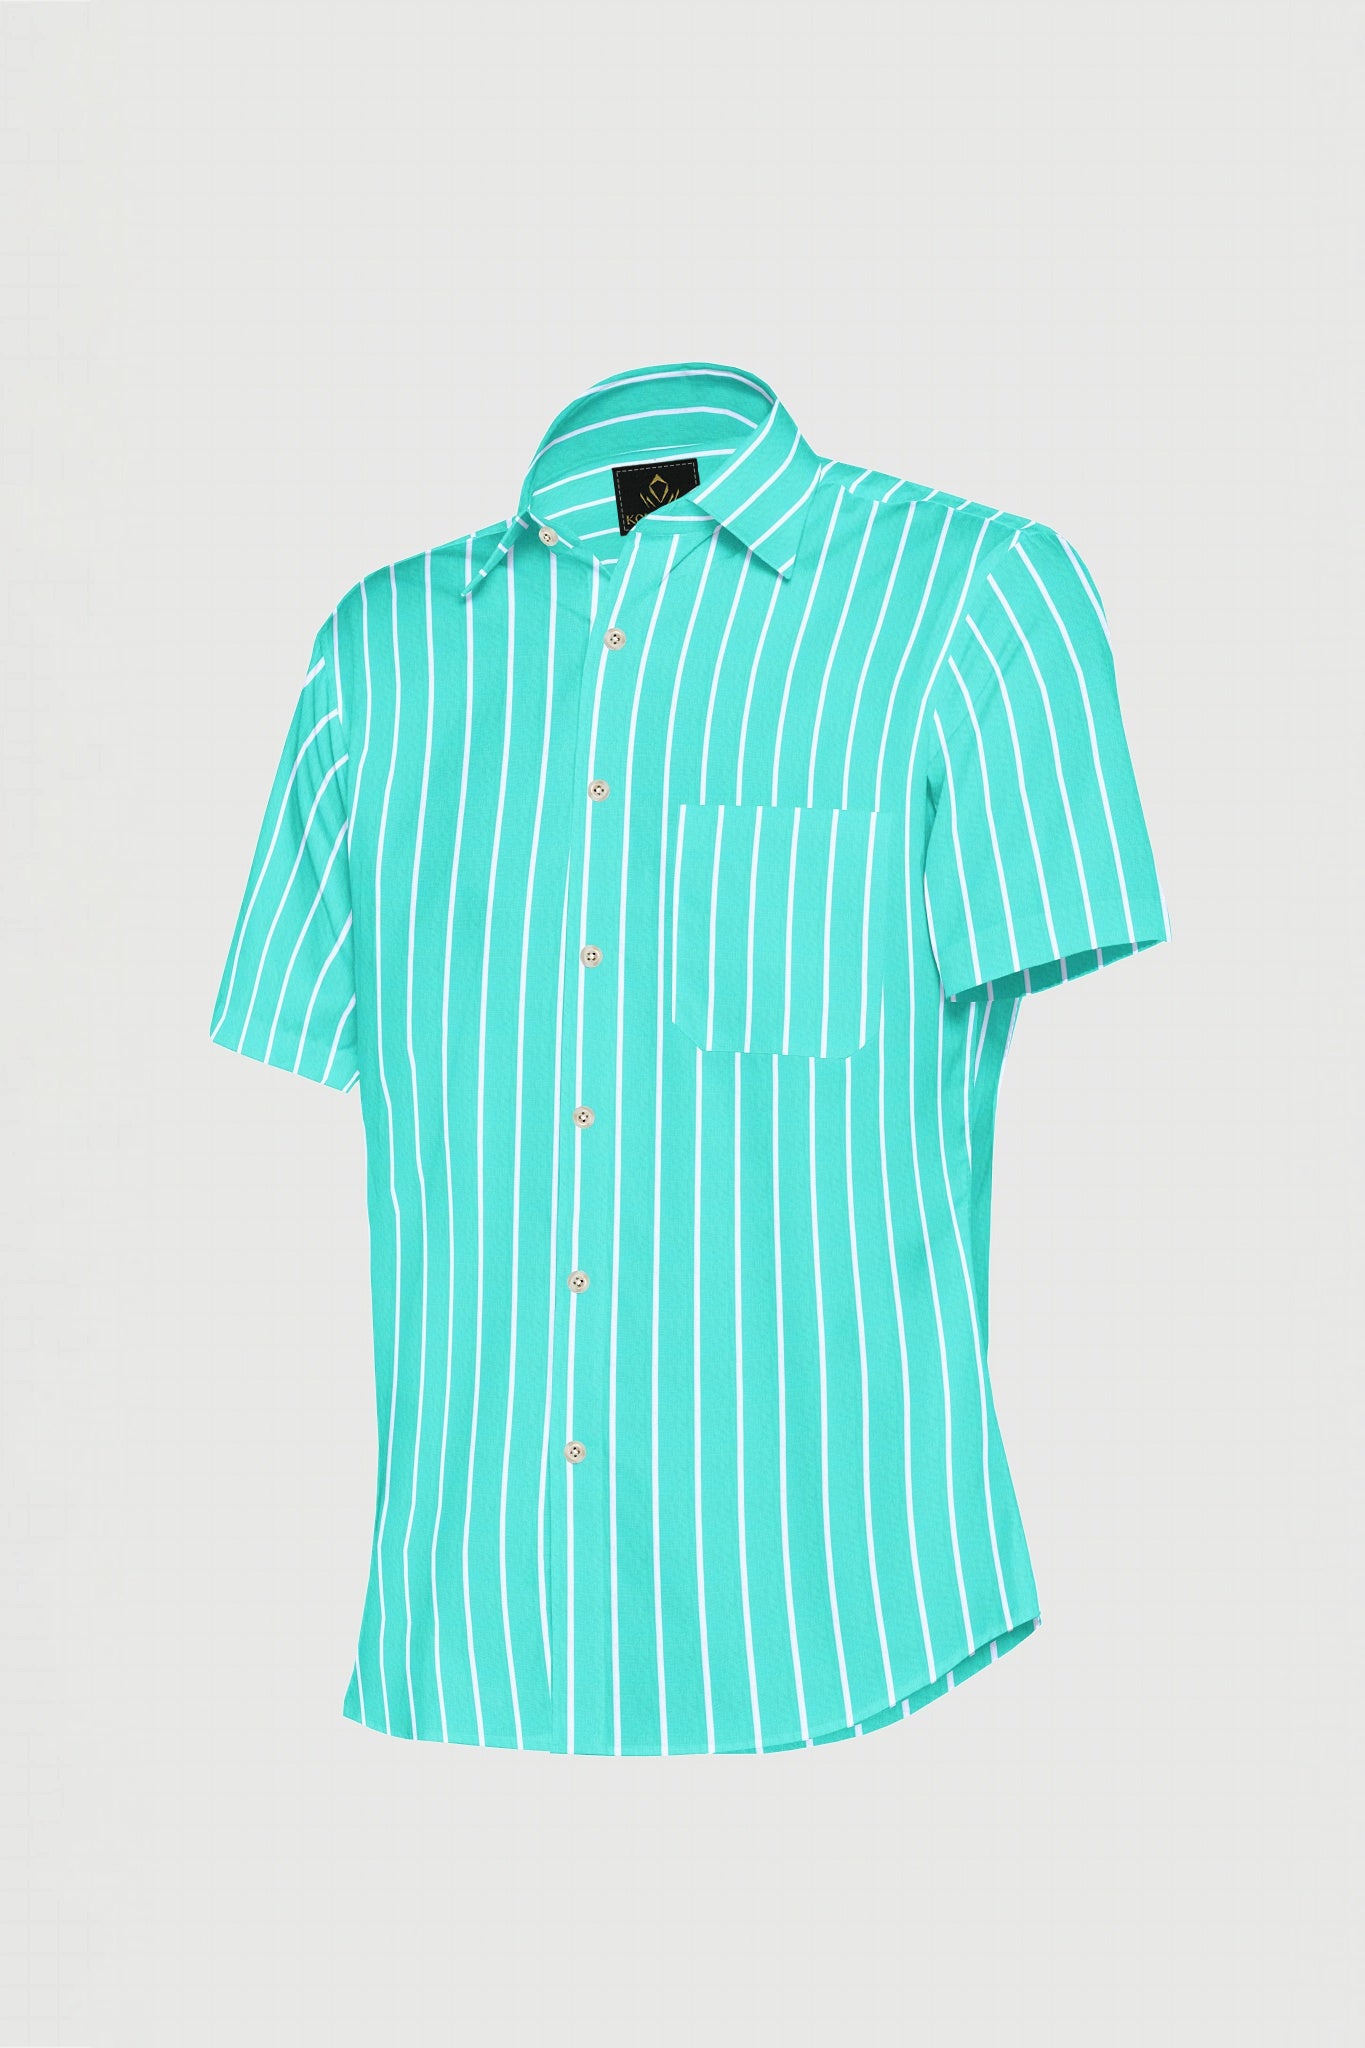 Tanager Turquoise Blue and White Stripes Cotton Shirt